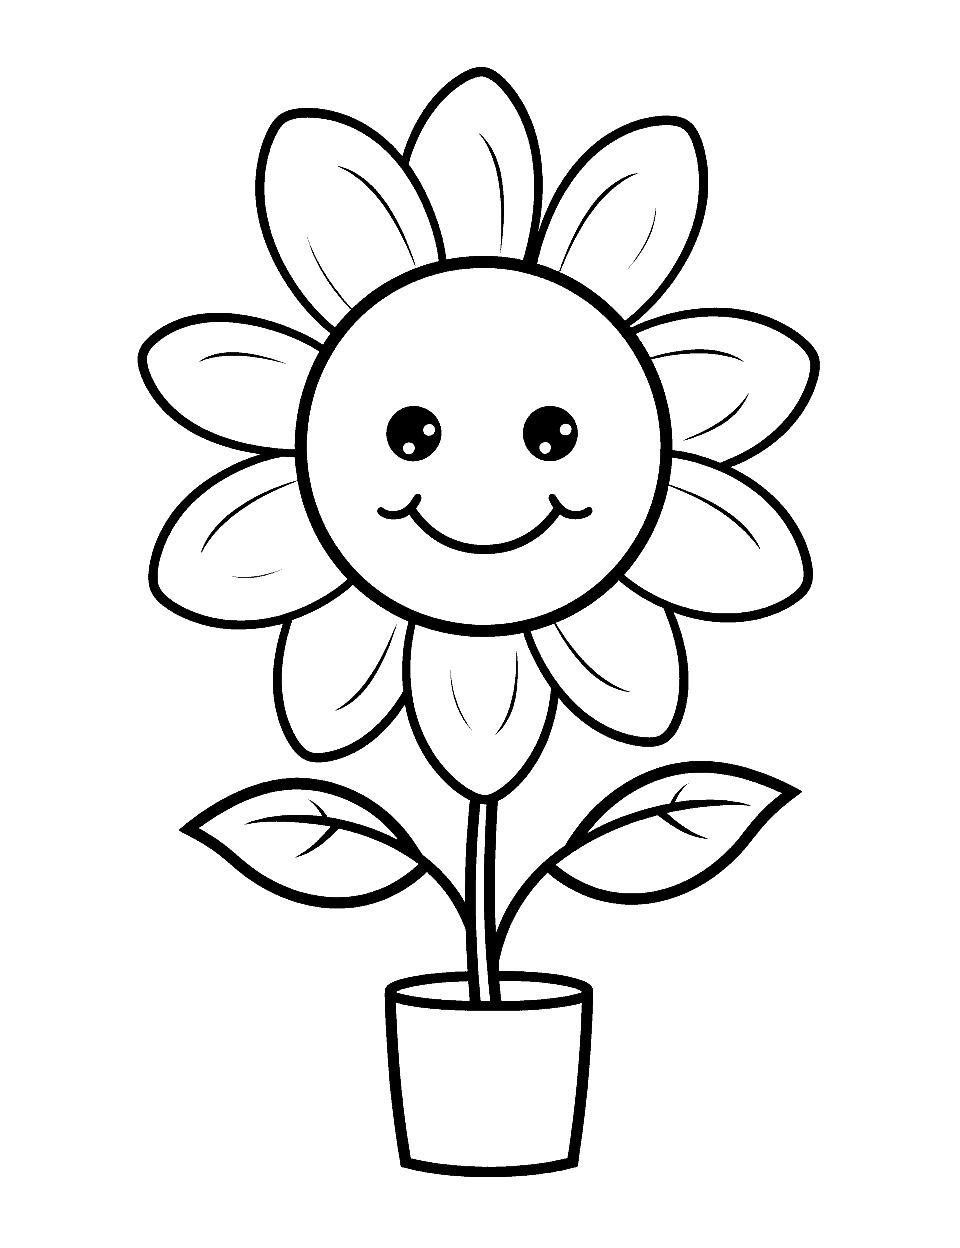 Cute and Easy Sunflower Flower Coloring Page - A cute, simplified sunflower design perfect for preschoolers.